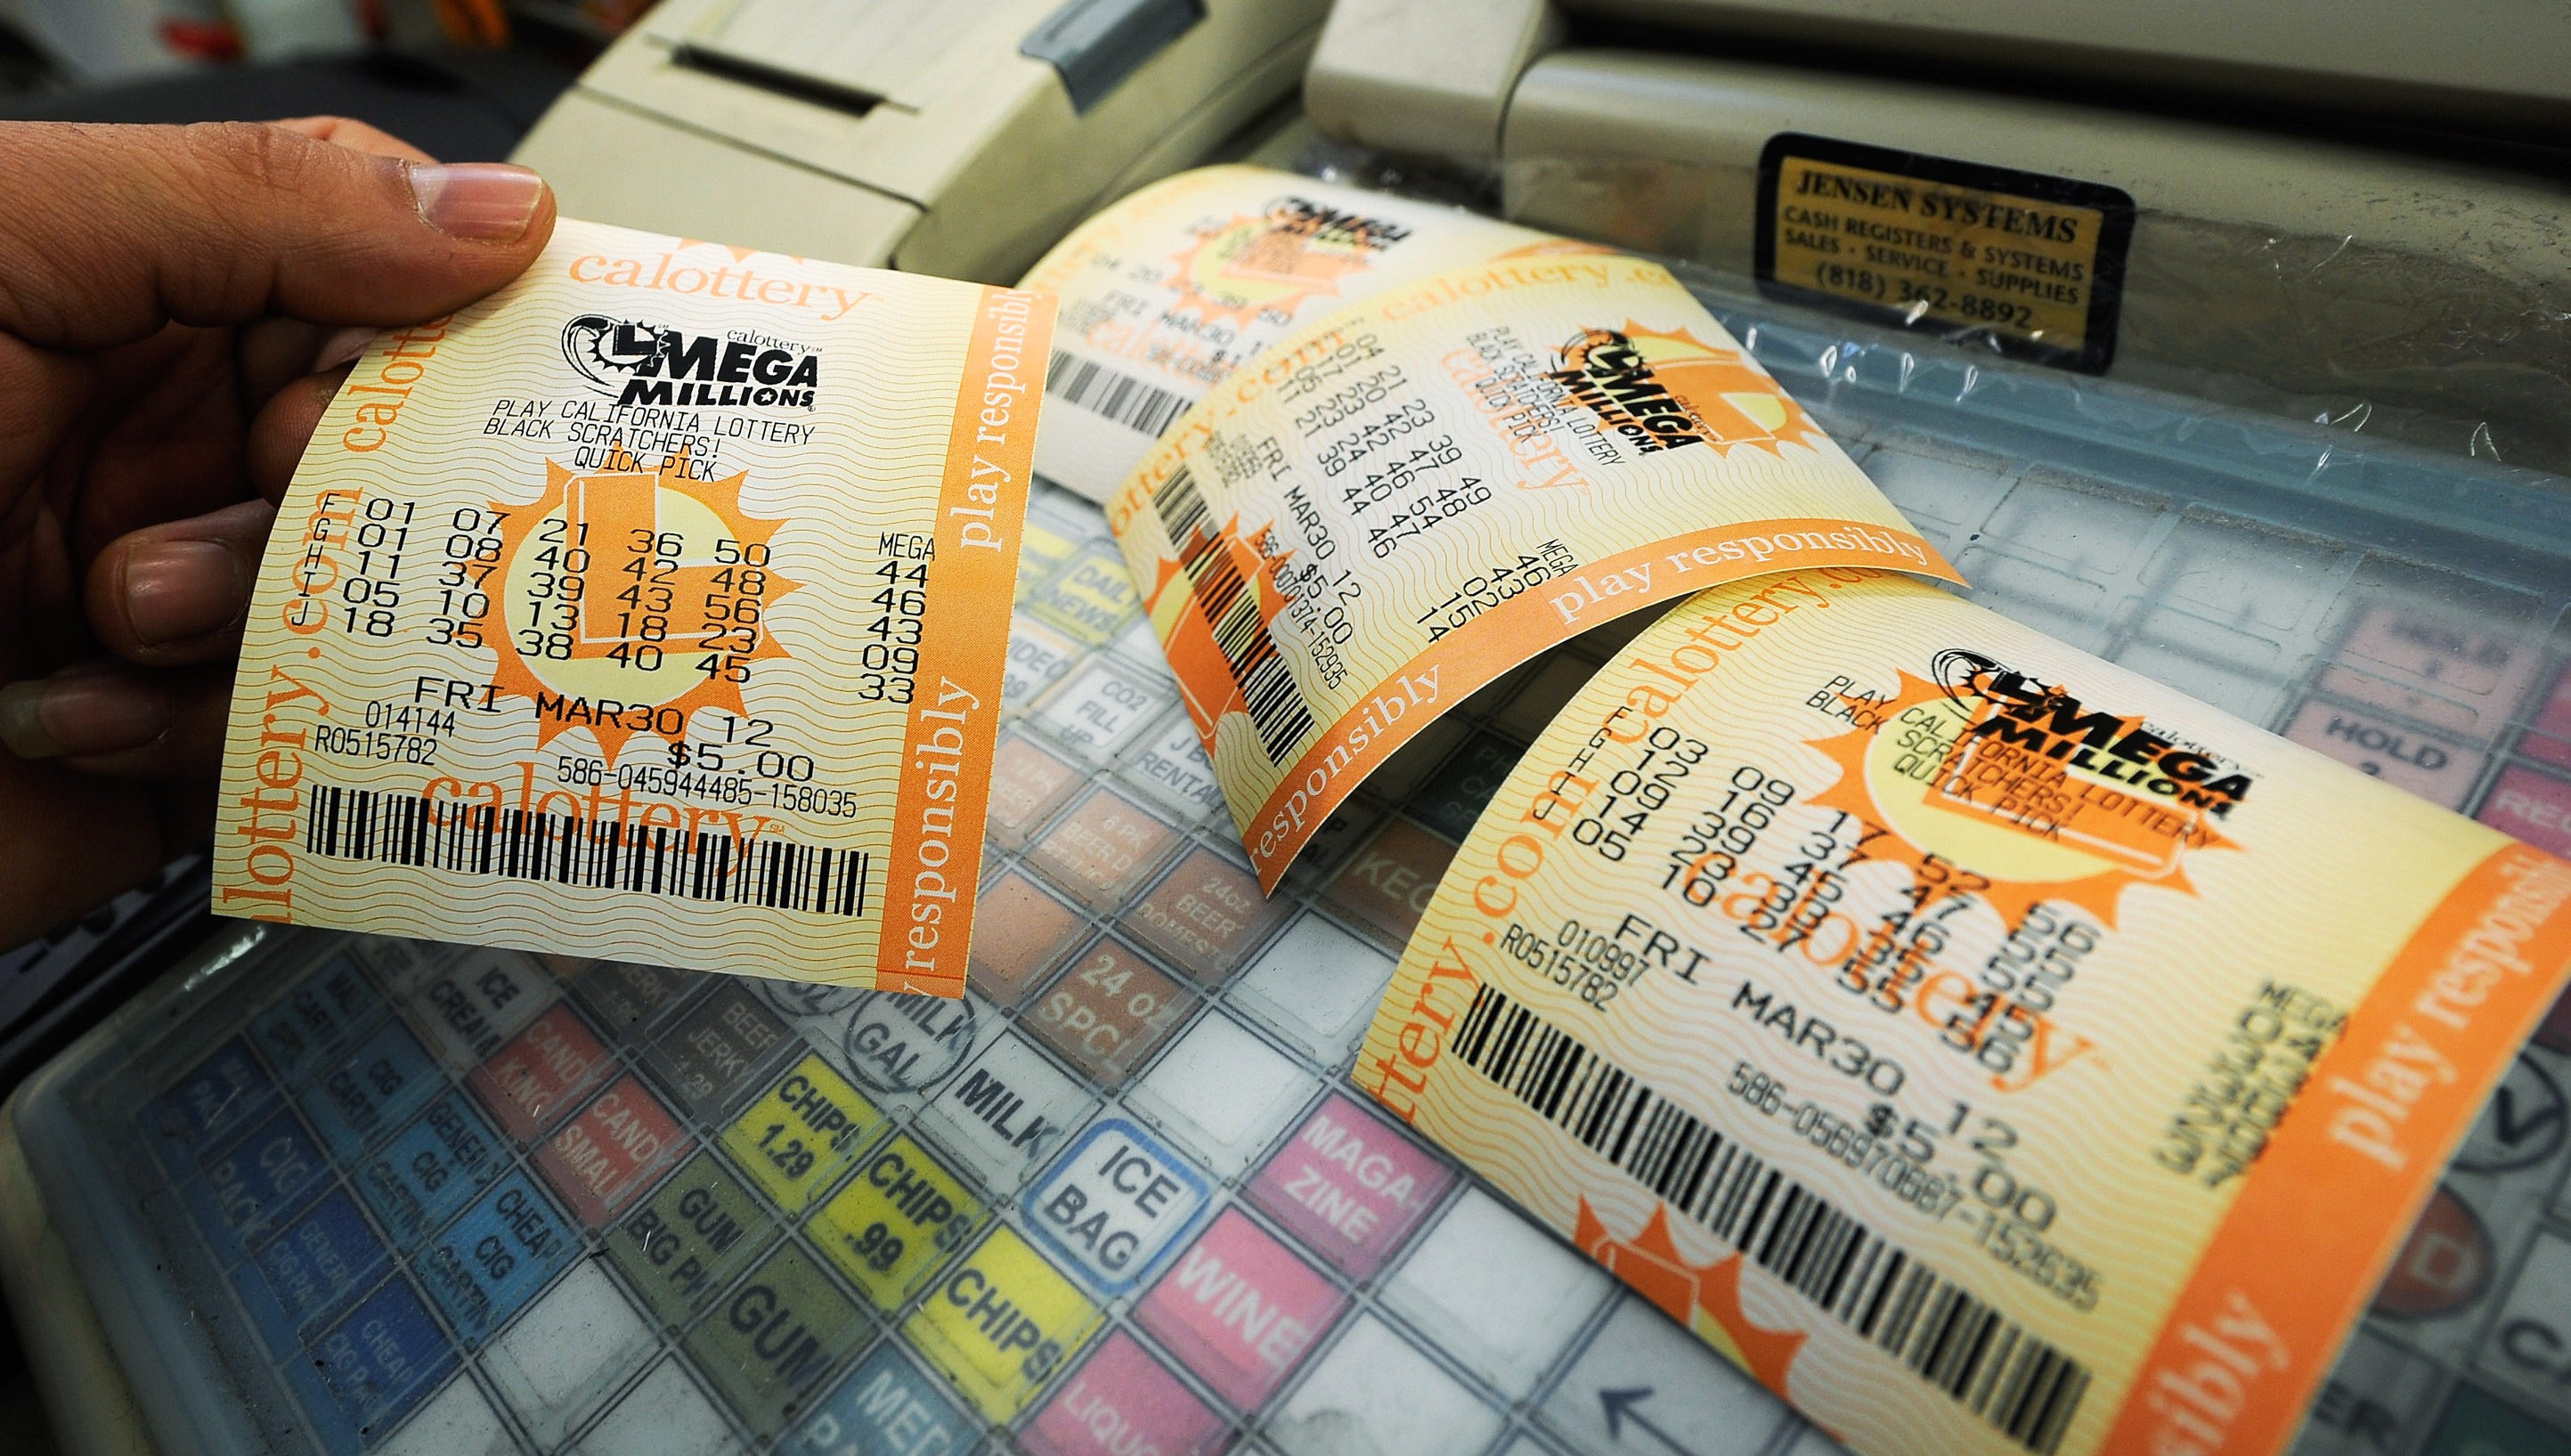 What Are the Mega Millions Winning Numbers for February 2?